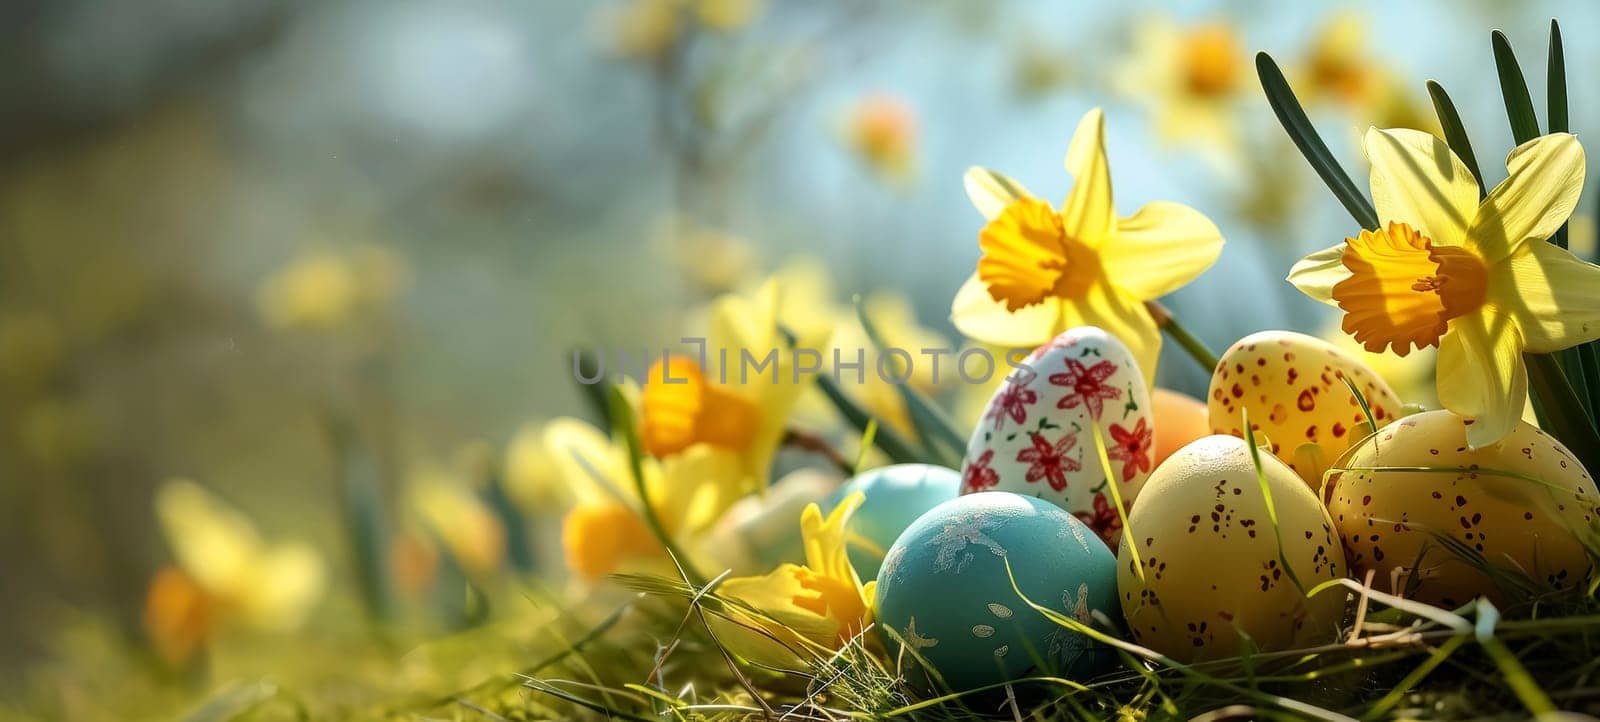 Easter Eggs and Daffodils in Morning Light by andreyz